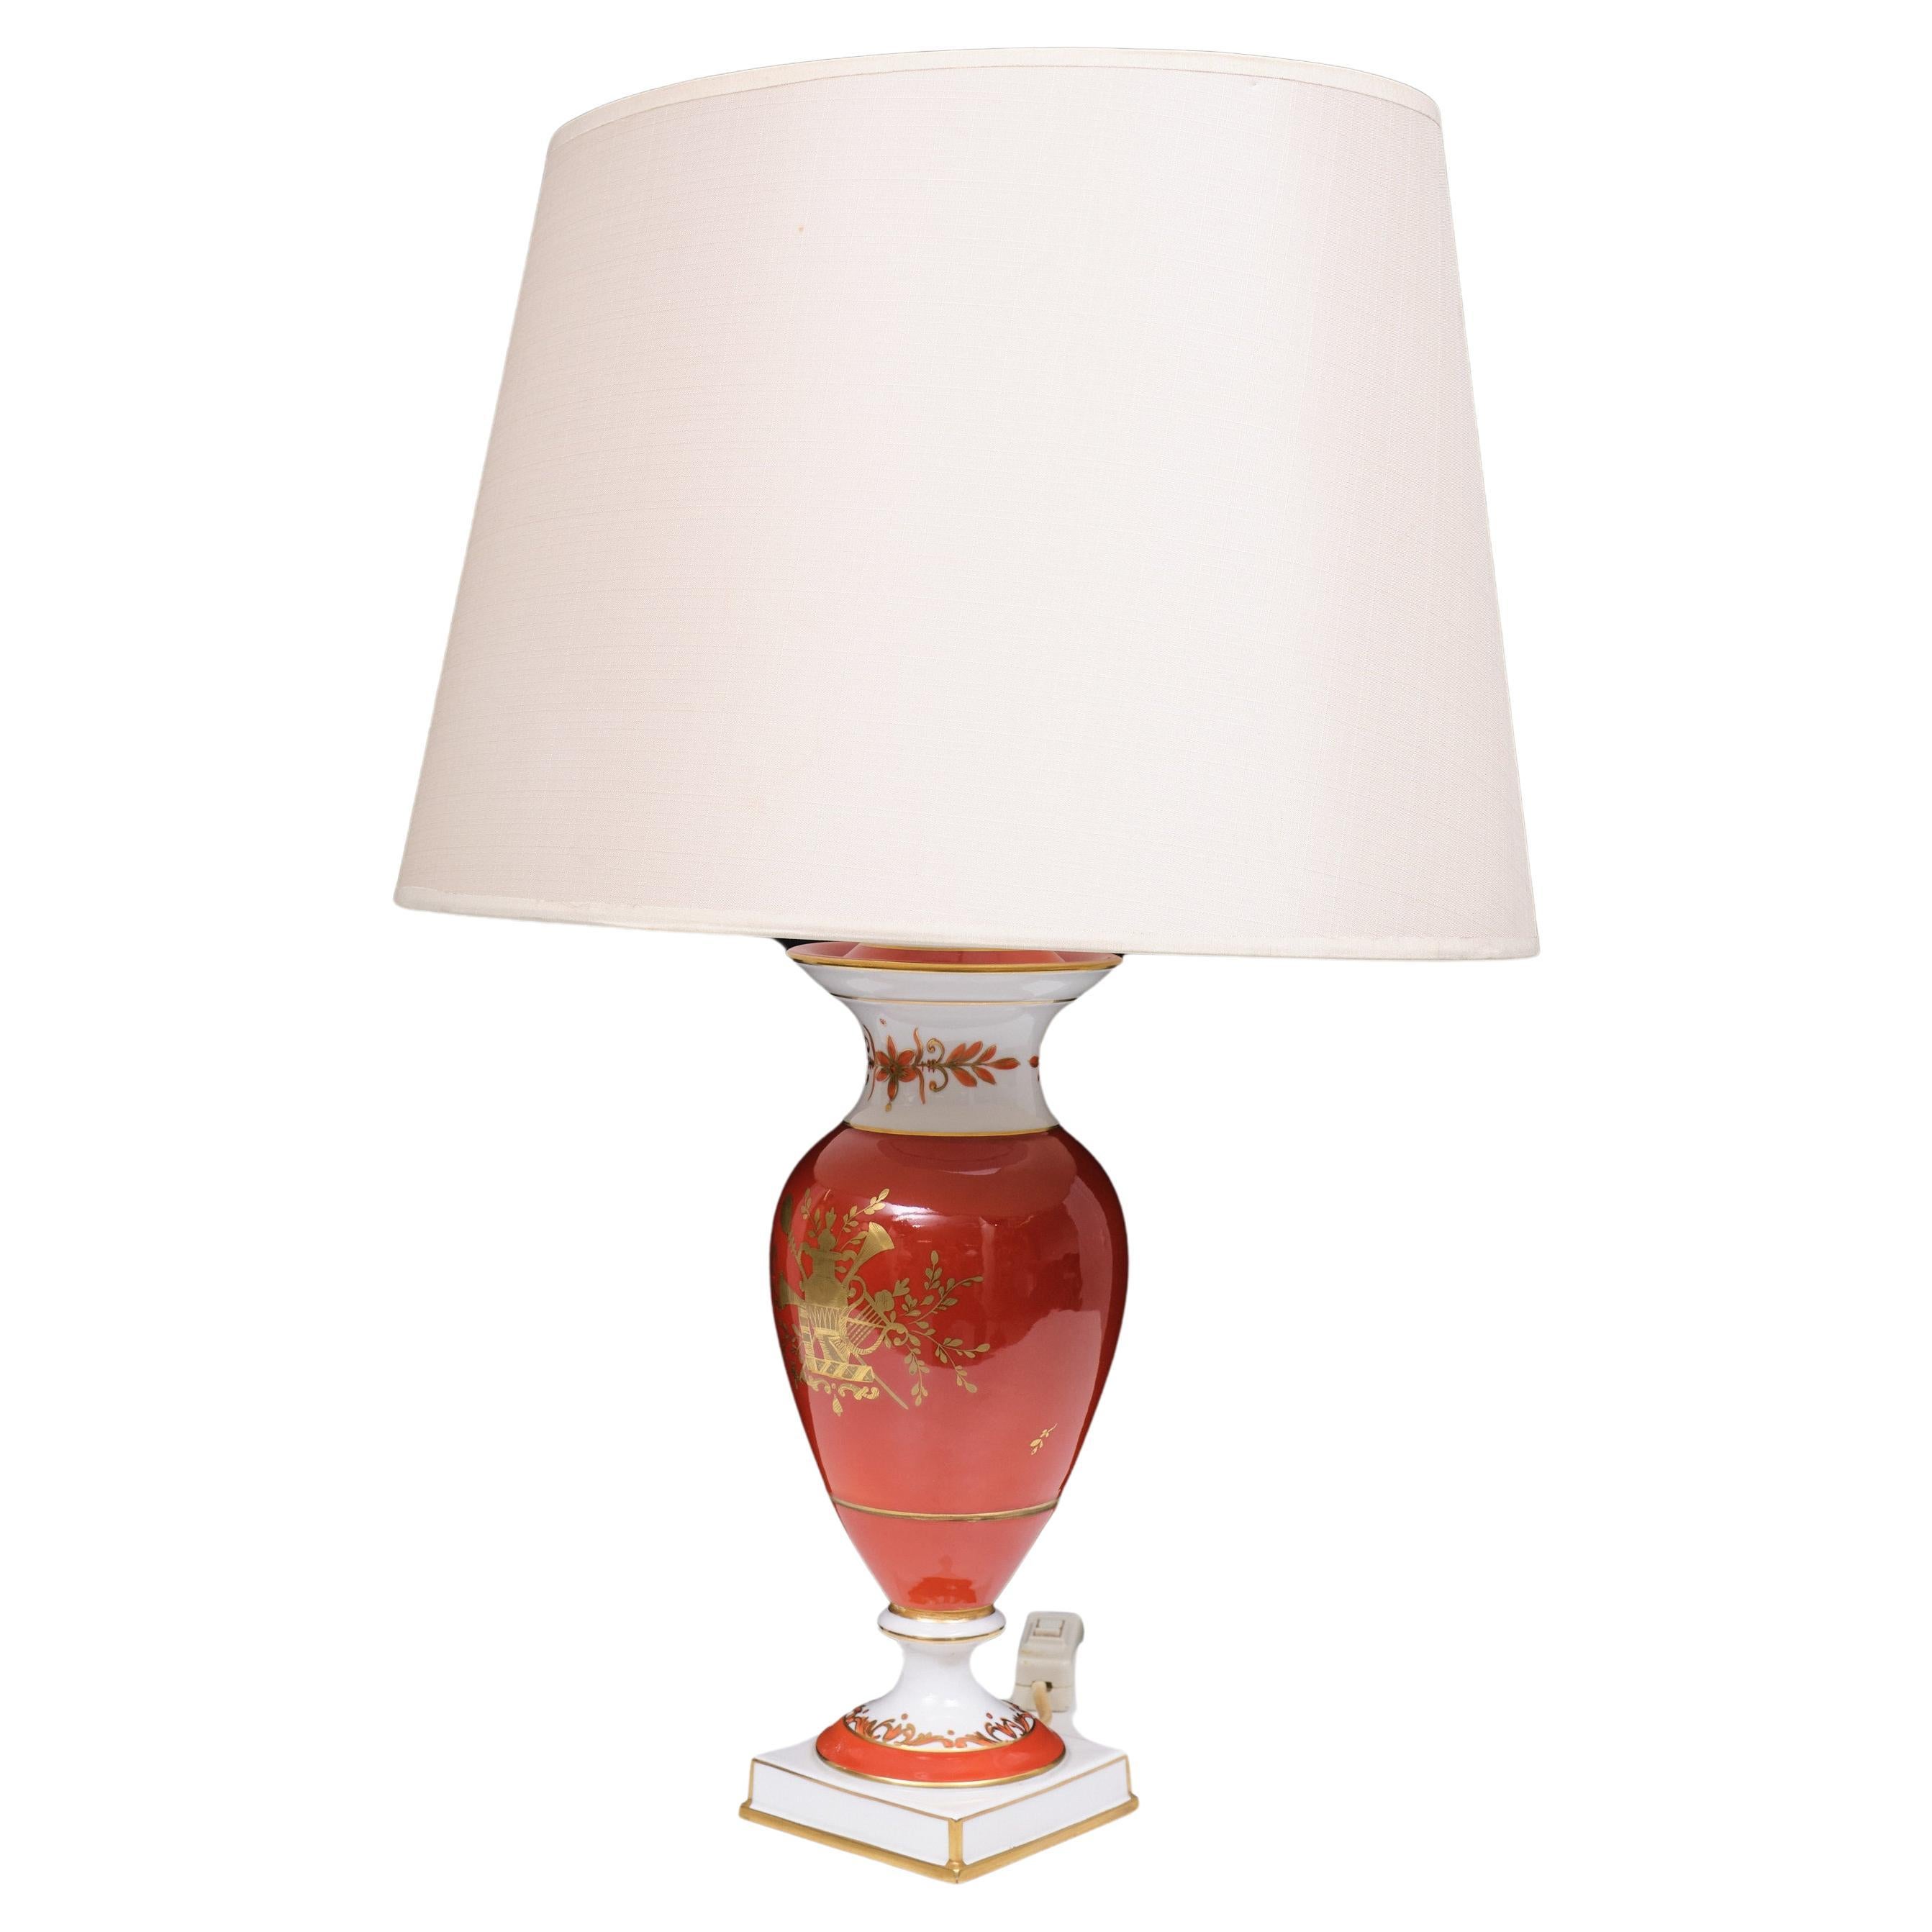 Very nice Classic table lamp ,signed Dresden porcelain . Beautiful Red  color ,
comes with gold musical medallion  in the middle . 
   